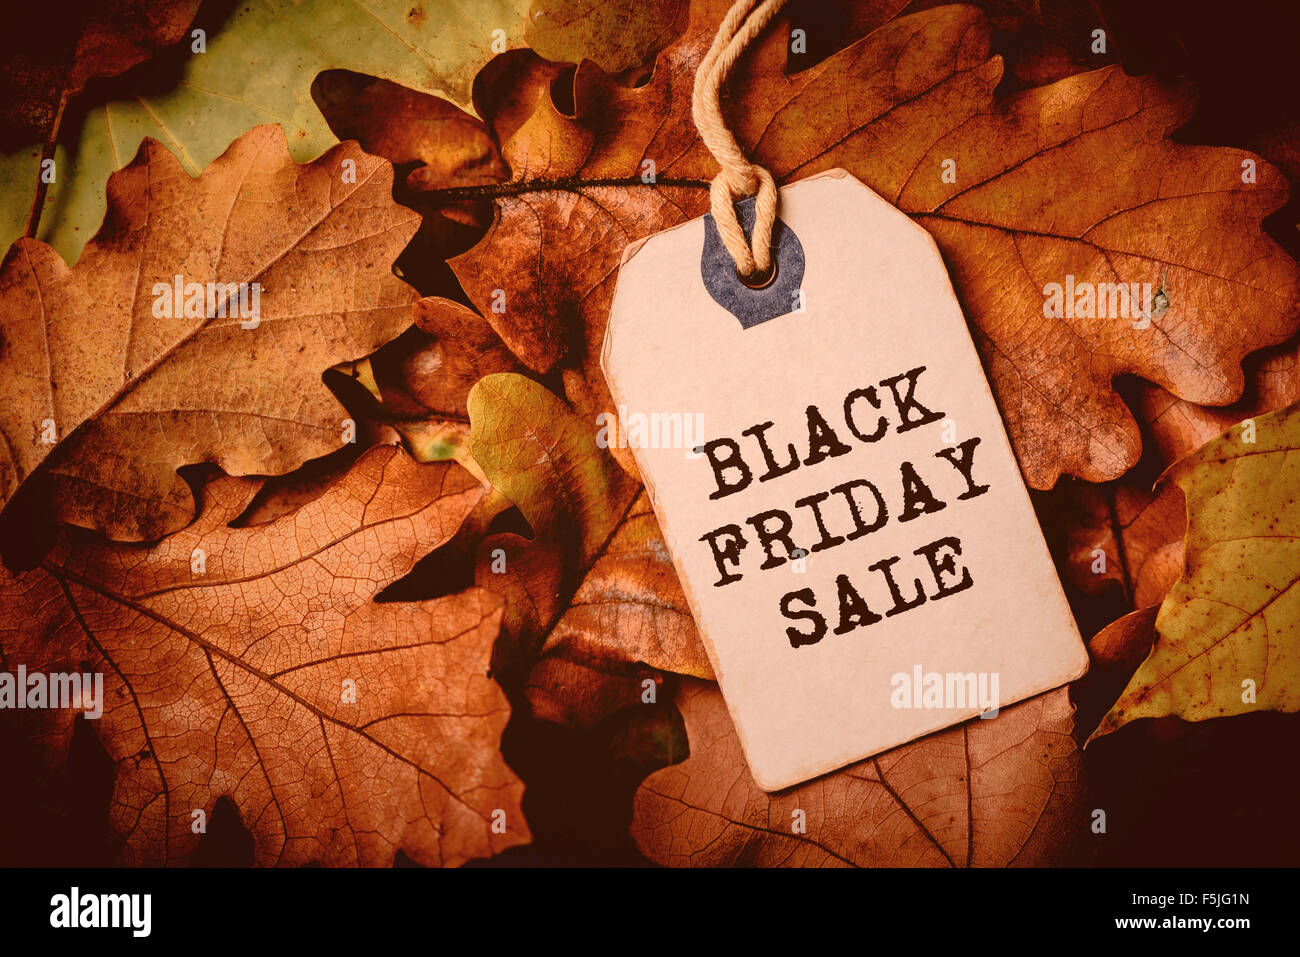 Price tag from with twine on dry autumn leaves background, autumn season sale event, Black Friday concept. Stock Photo